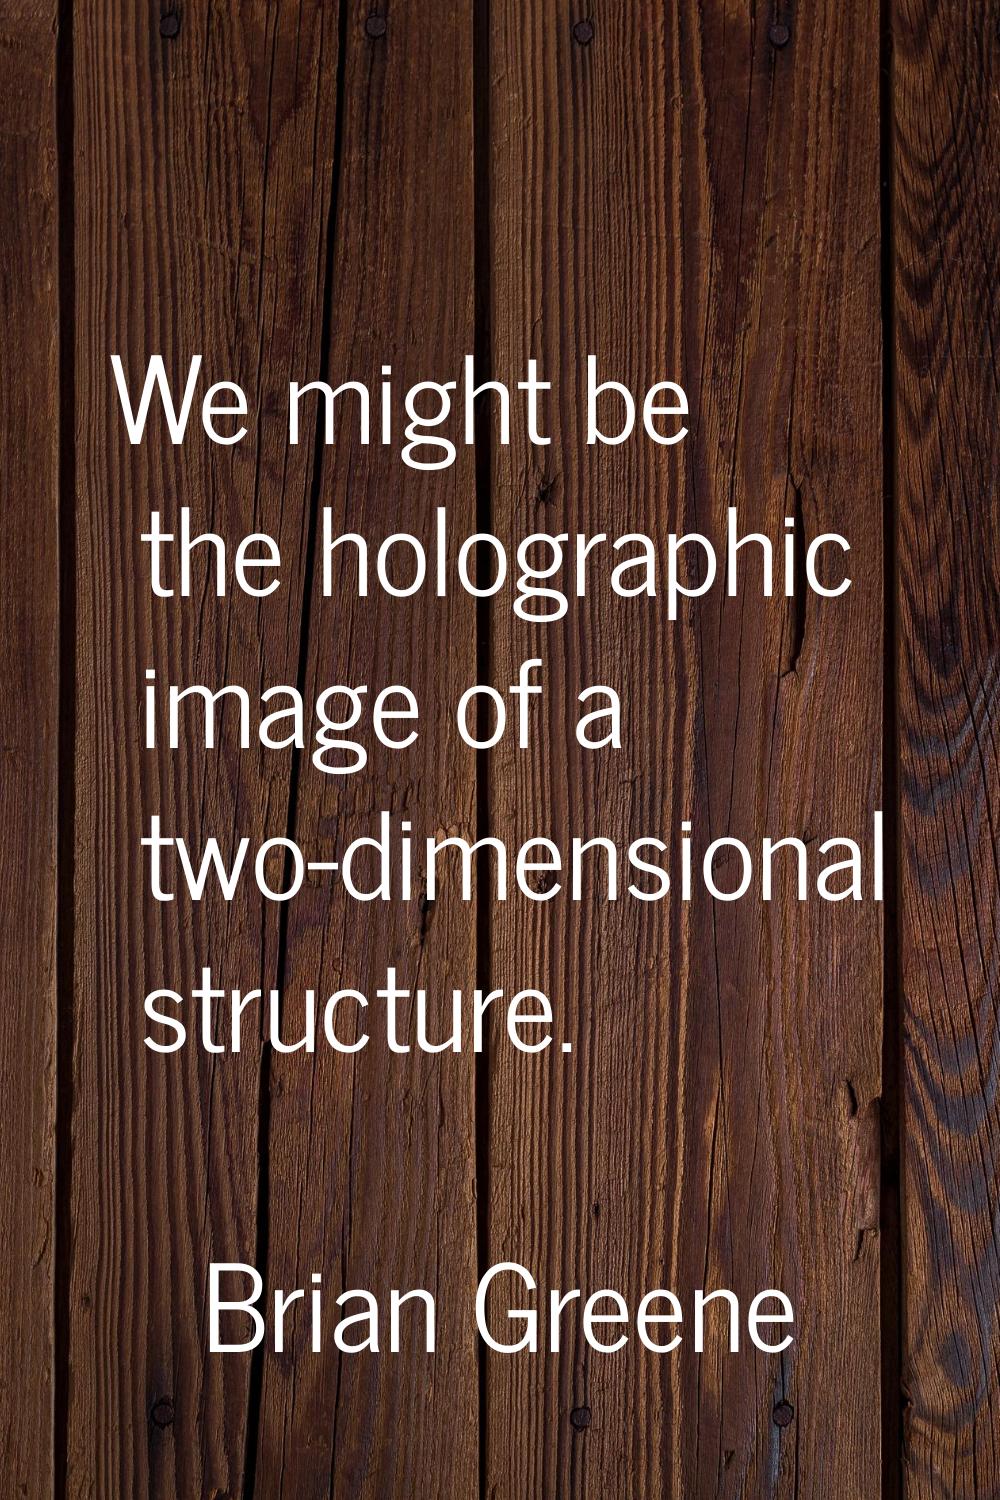 We might be the holographic image of a two-dimensional structure.